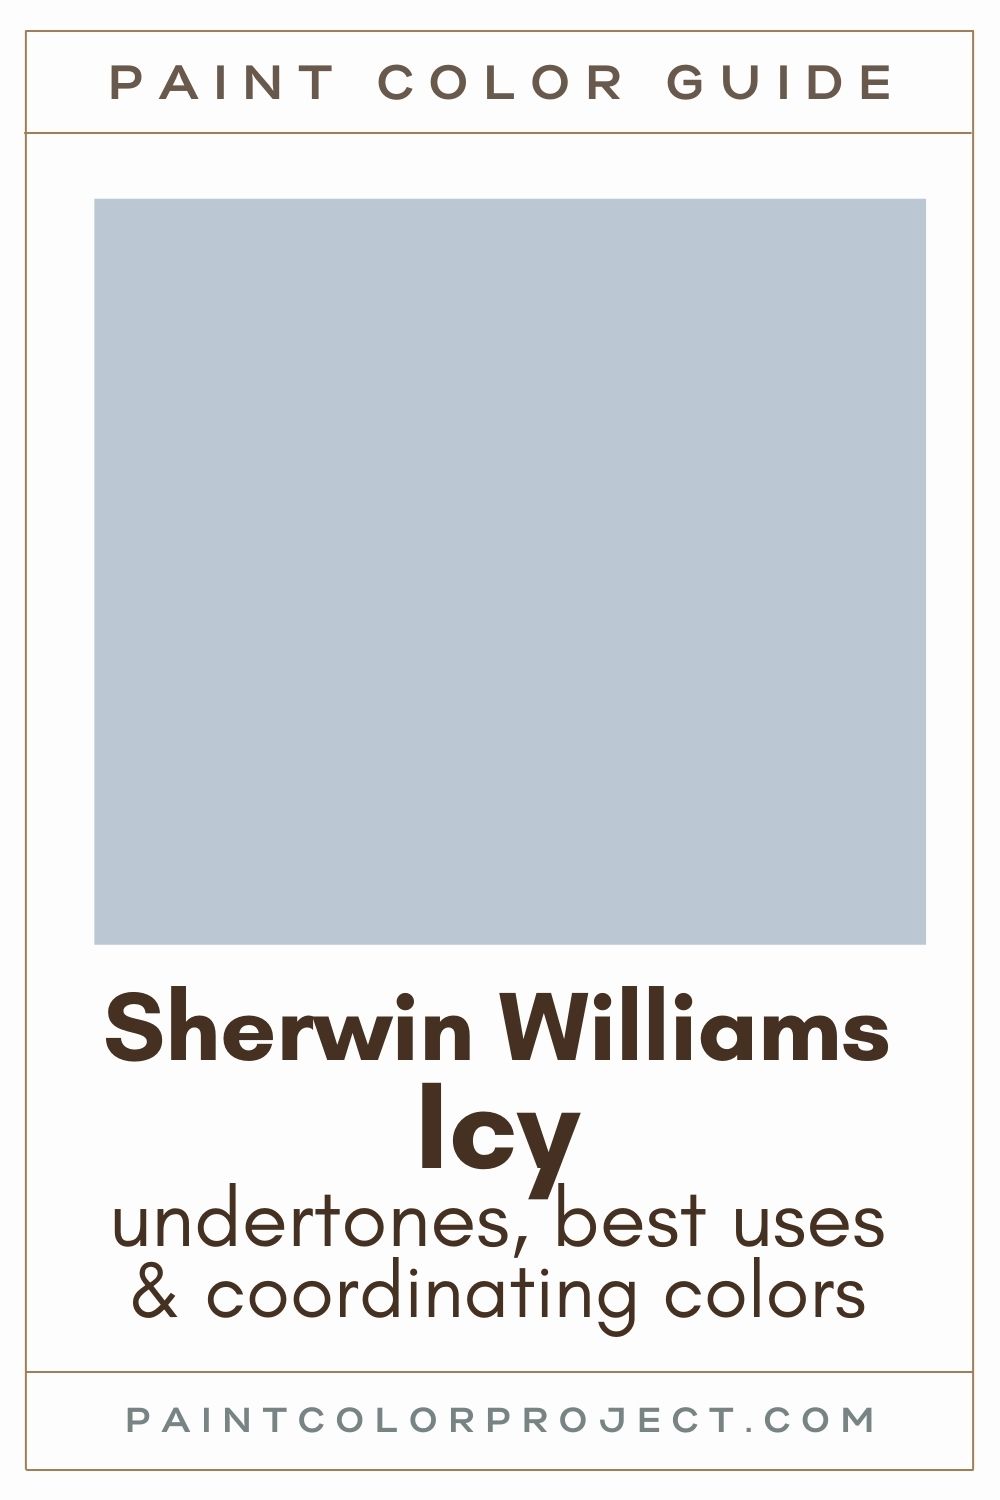 Permeabilidad Admisión Guia Sherwin Williams Icy: a complete color review - The Paint Color Project